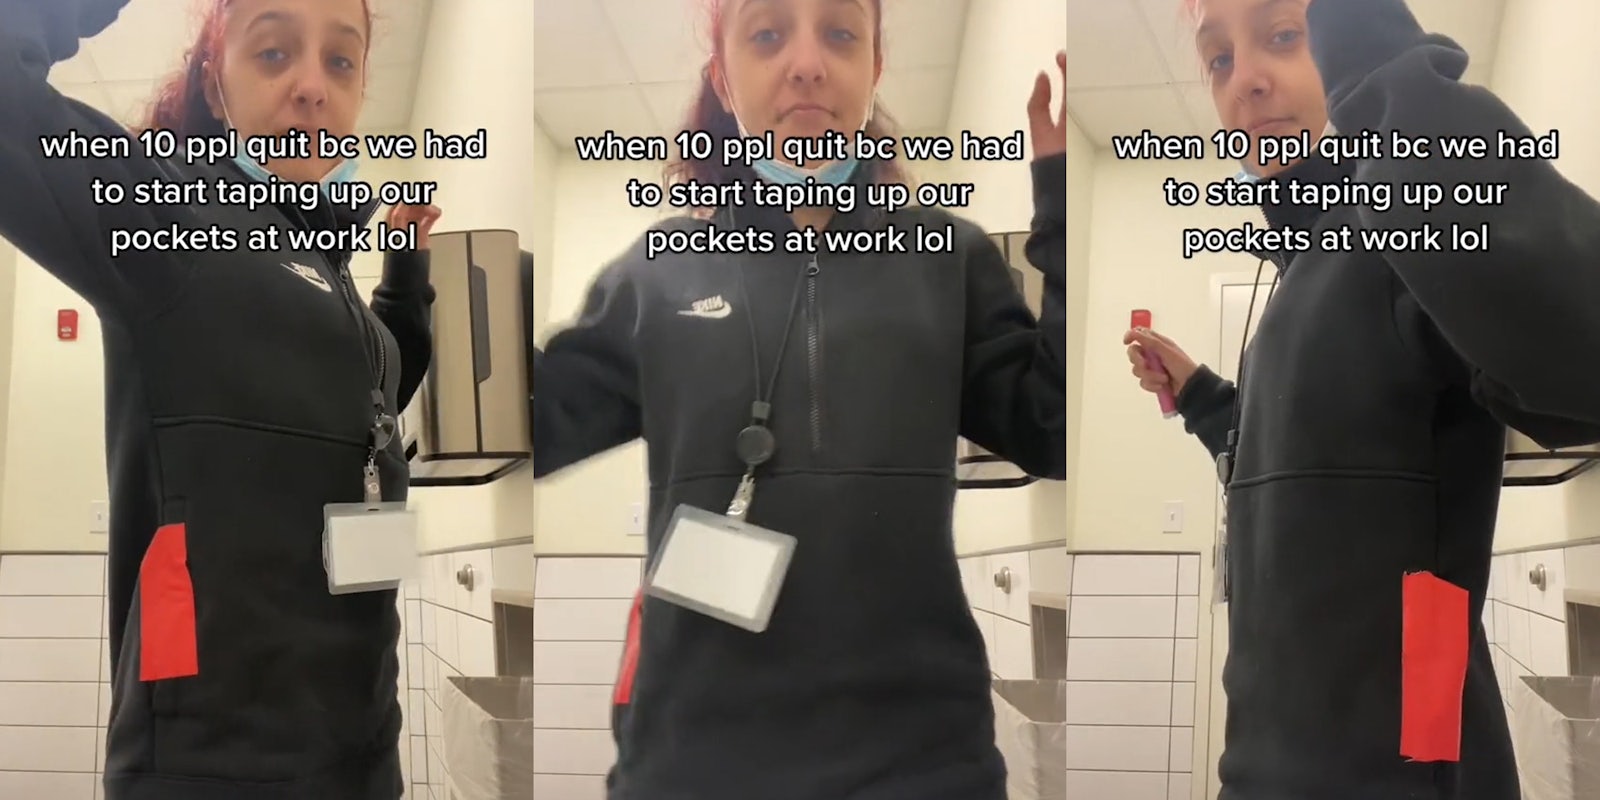 worker in bathroom showing pockets taped shut with orange tape with caption 'when 10 ppl quit bc we had to start taping up our pockets at work lol' (l) worker in bathroom showing pockets taped shut with orange tape with caption 'when 10 ppl quit bc we had to start taping up our pockets at work lol' (c) worker in bathroom showing pockets taped shut with orange tape with caption 'when 10 ppl quit bc we had to start taping up our pockets at work lol' (r)